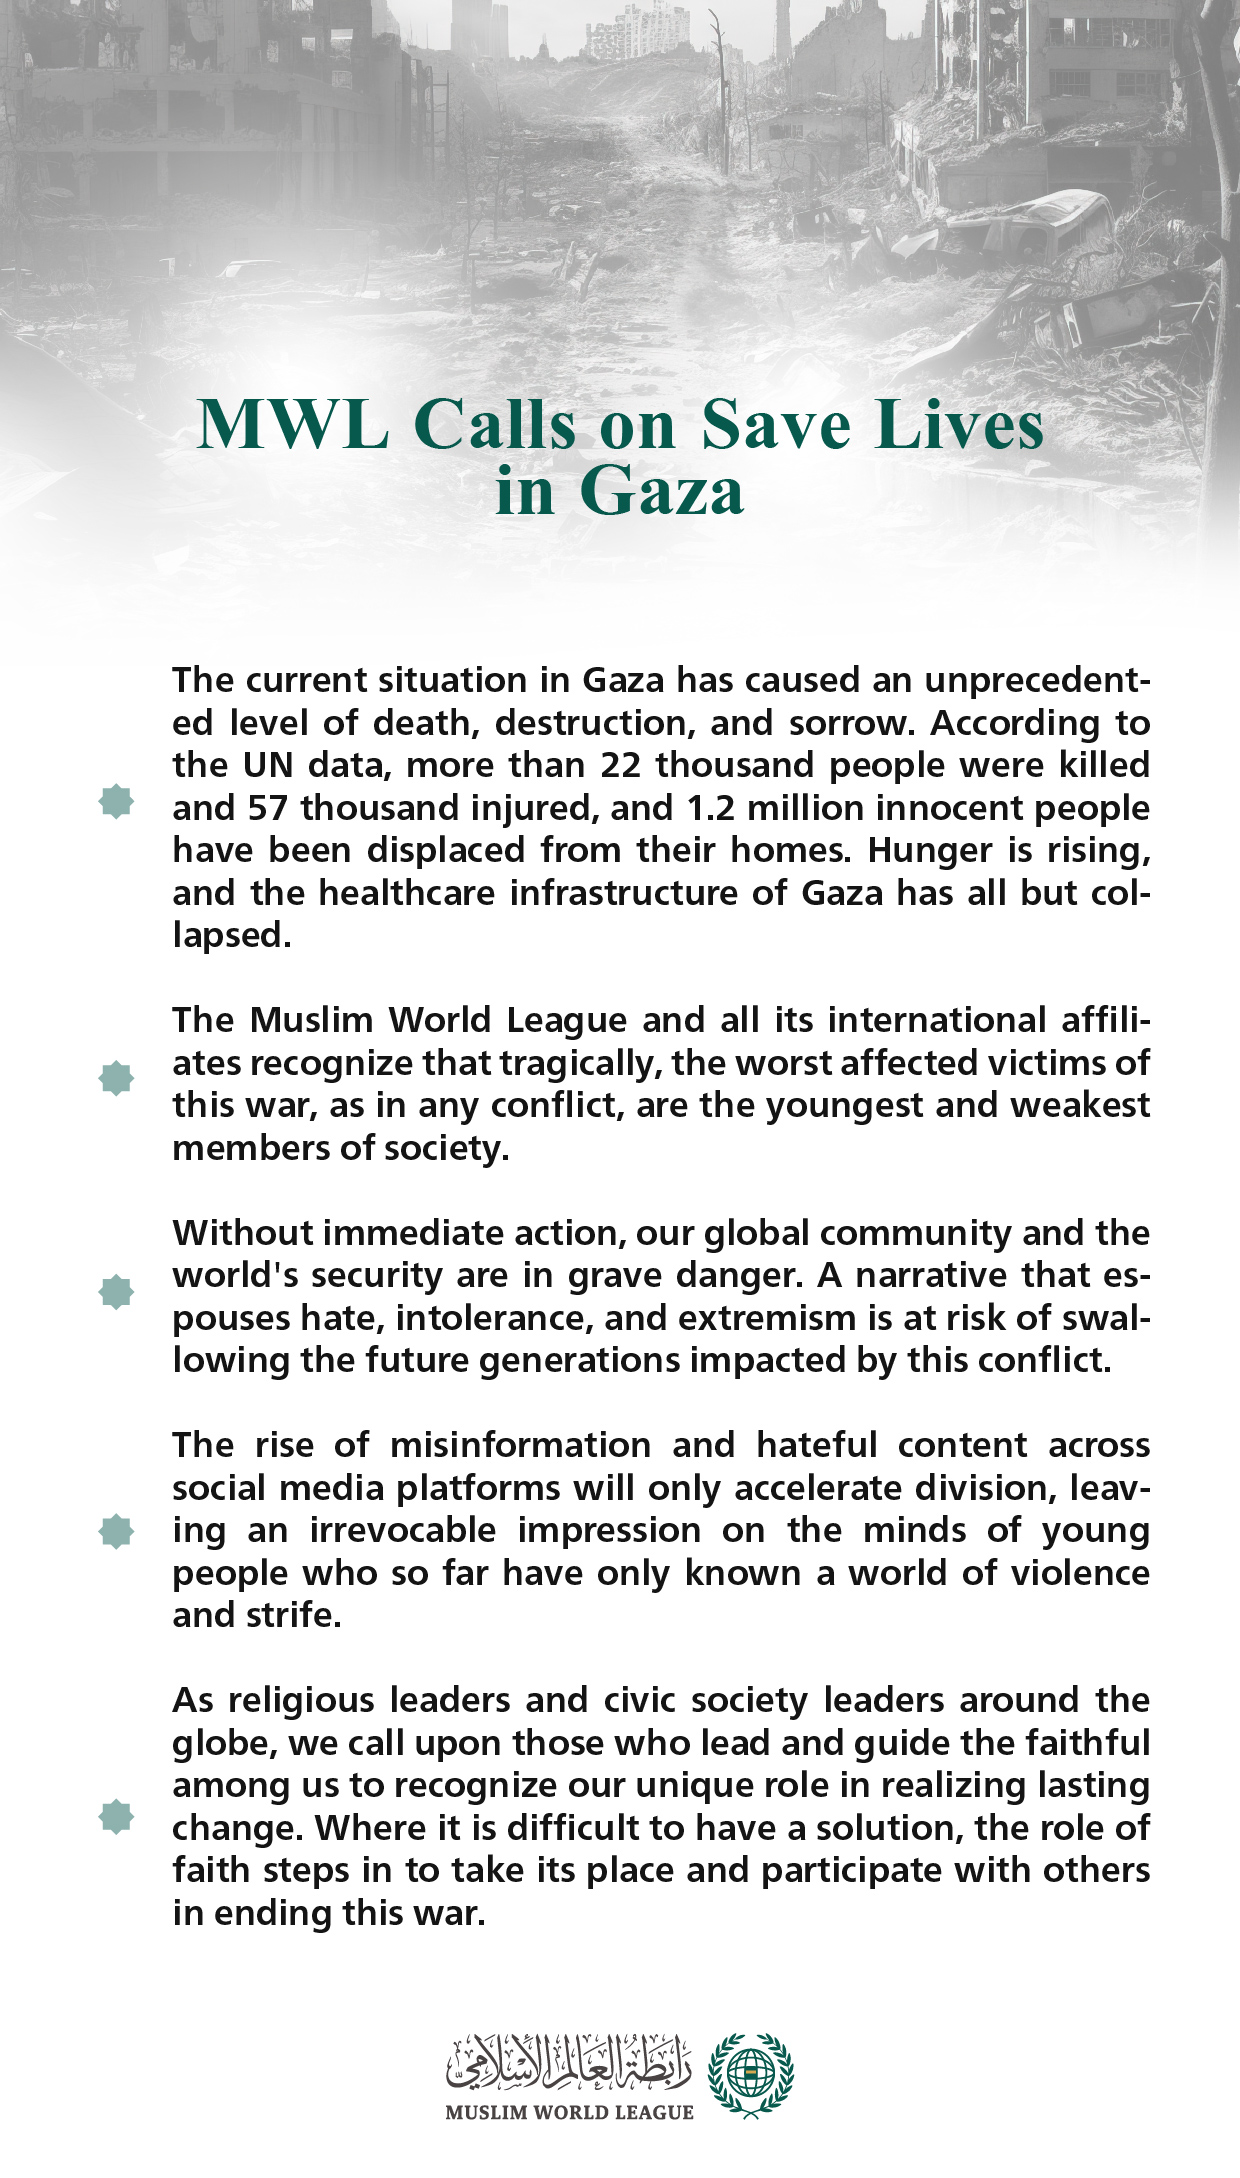 Sign the “Gaza Petition”. The first international petition bringing together interfaith religious leaders and organizations, launched by the Muslim World League 